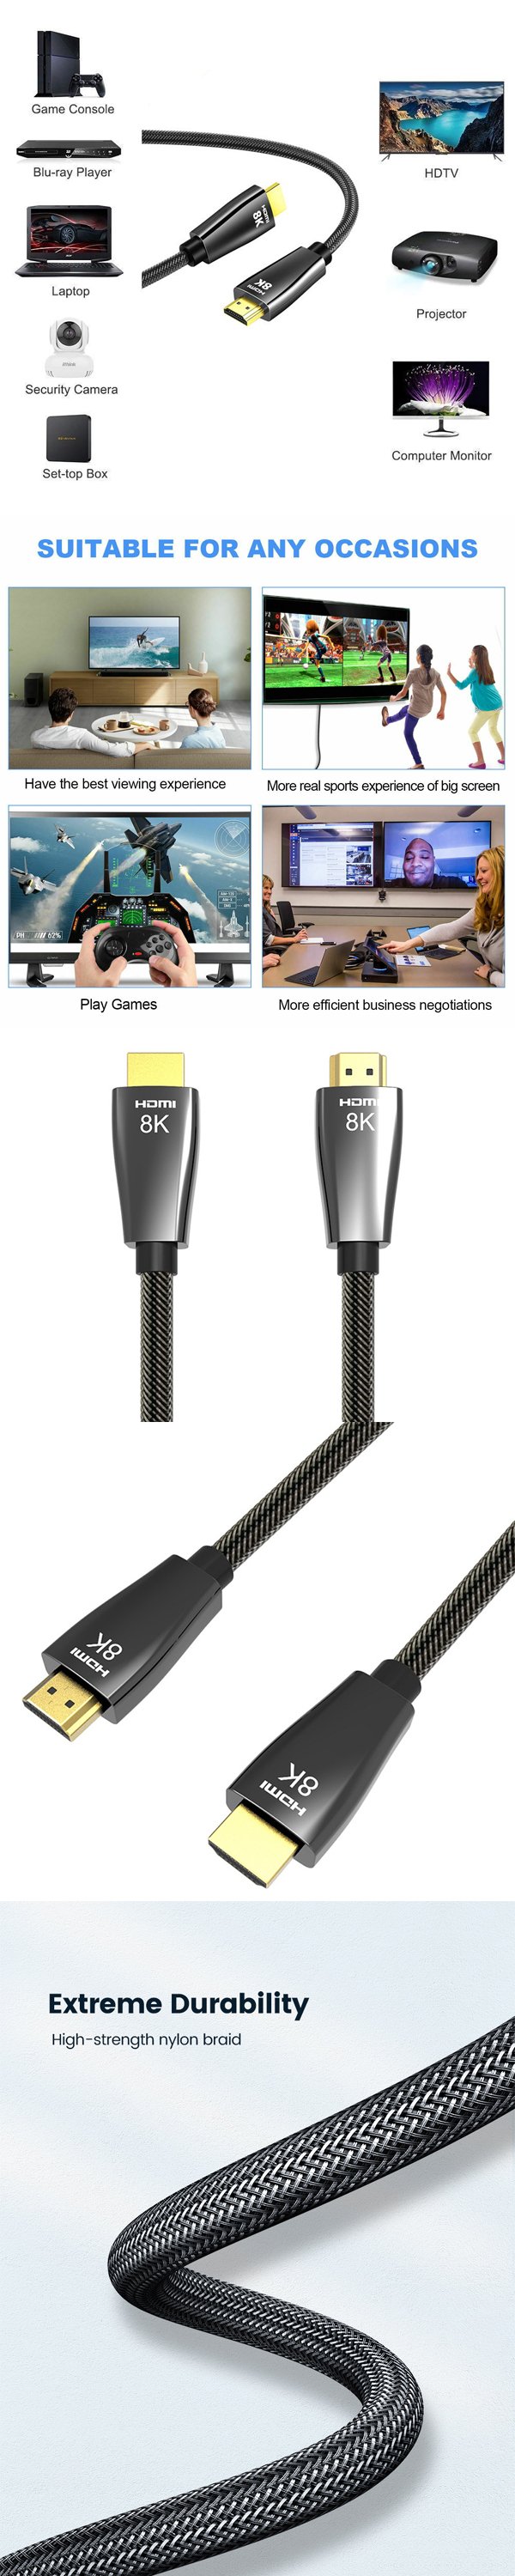 HDMI 2.1 8K Cable Pure Copper 2m (6.6ft) Up to 8K @60Hz, 4K@120Hz, 48Gbps,  3D, 100% Copper, HDMI 2.1, HDCP 2.2, HDR, Dolby Vision, ARC, Dolby Atmos